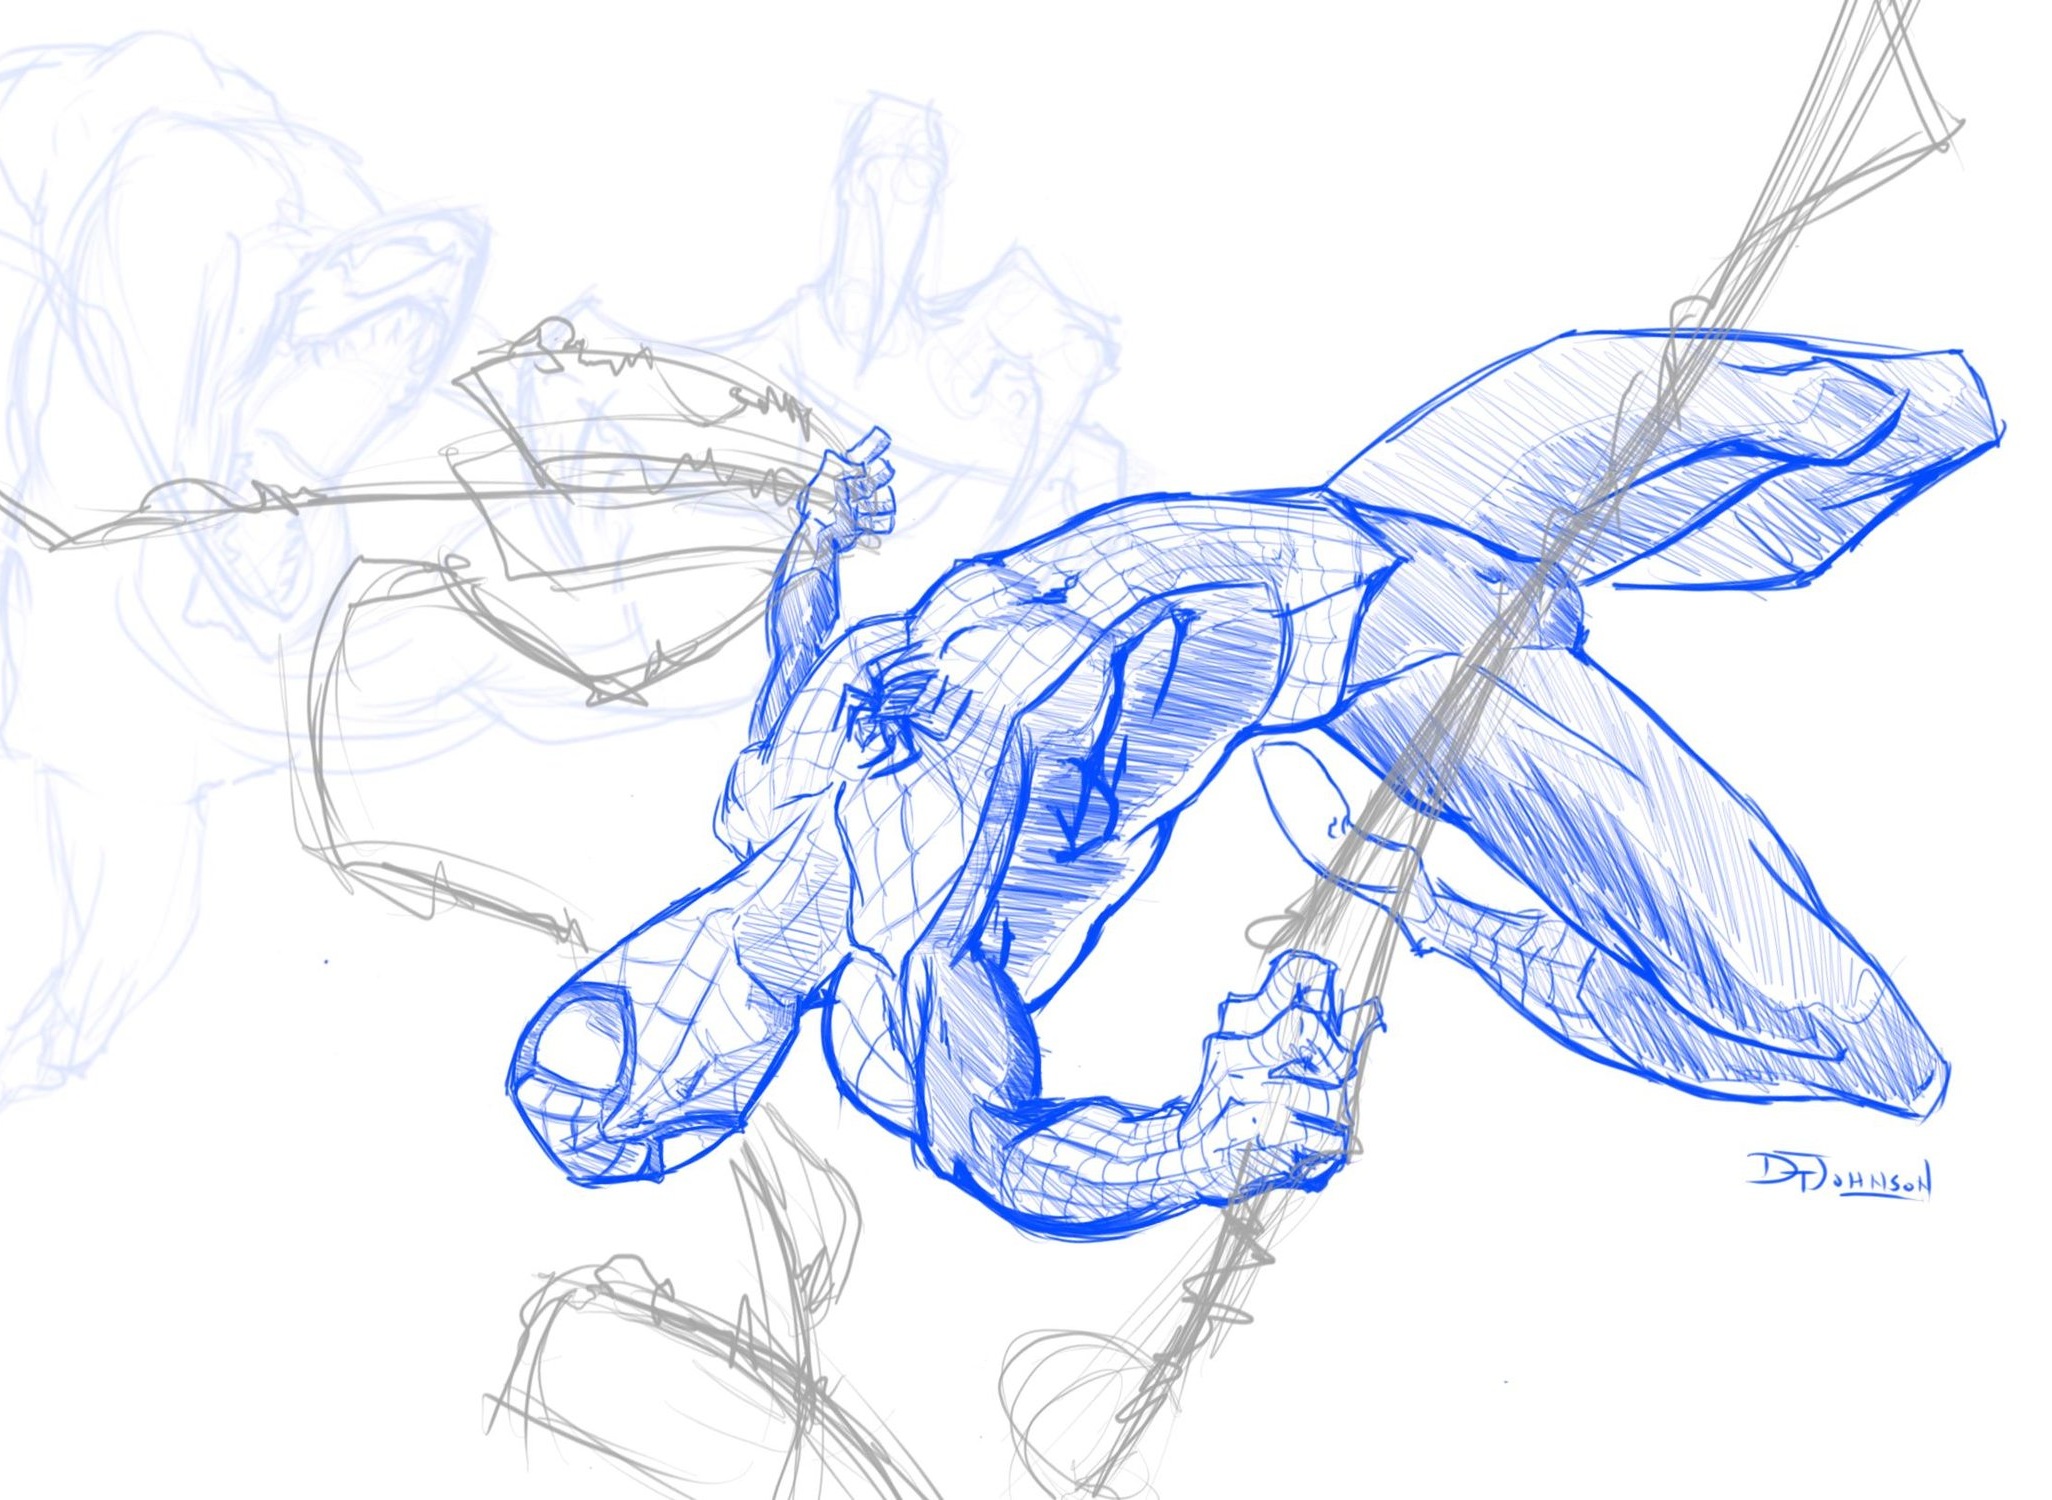 How to Draw Spider-Man Step by Step - DrawingNow